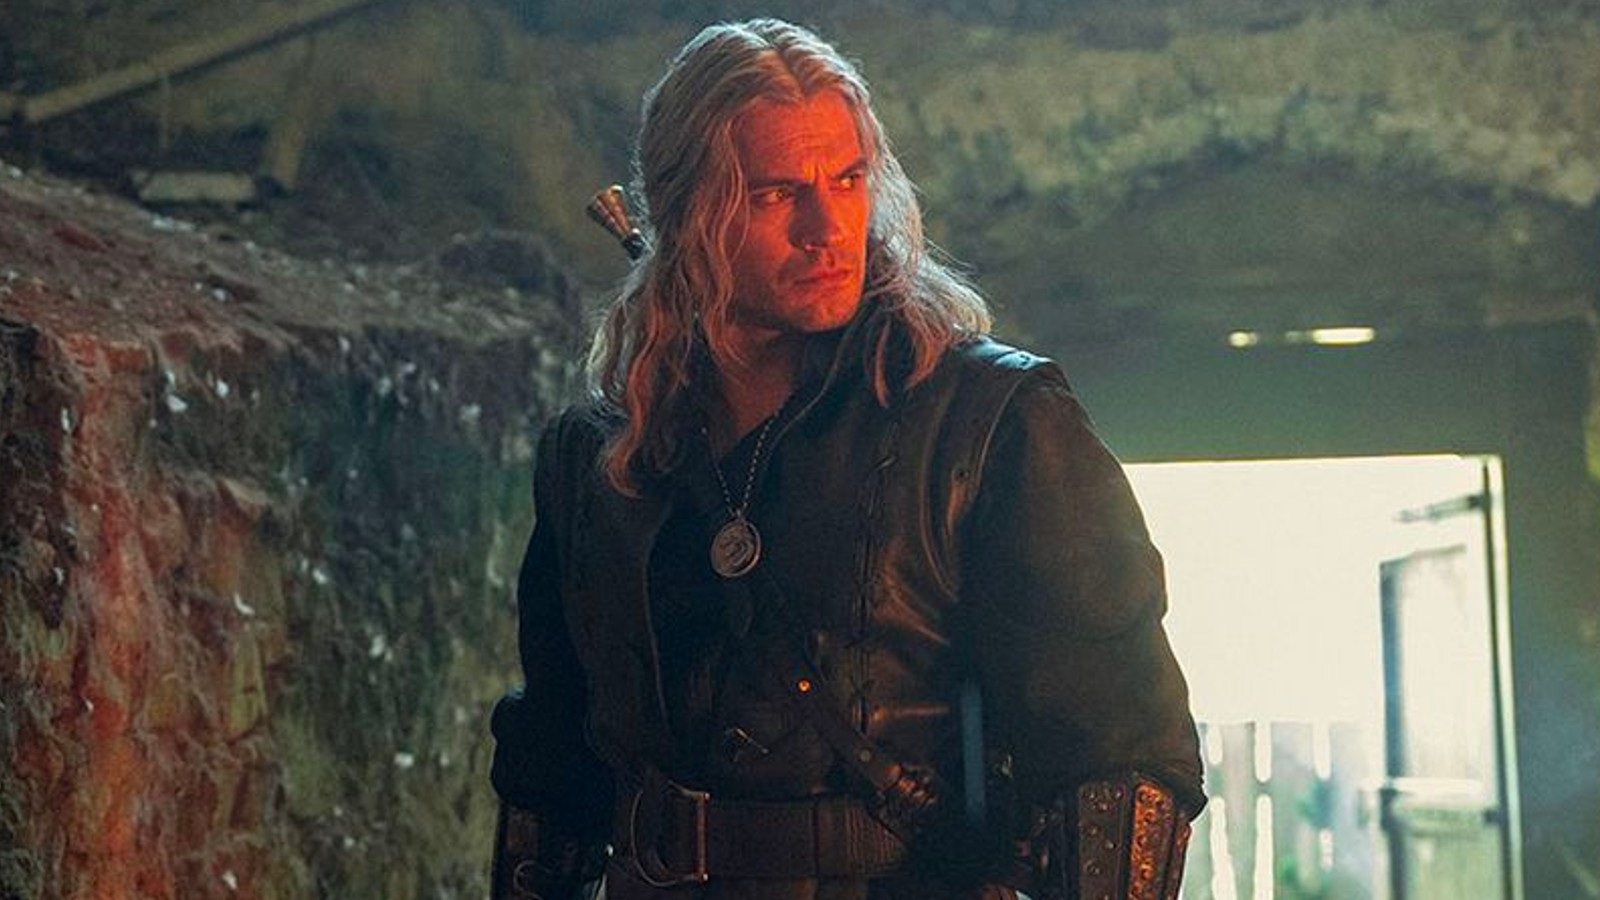 Netflix's The Witcher coming to an end sooner than expected